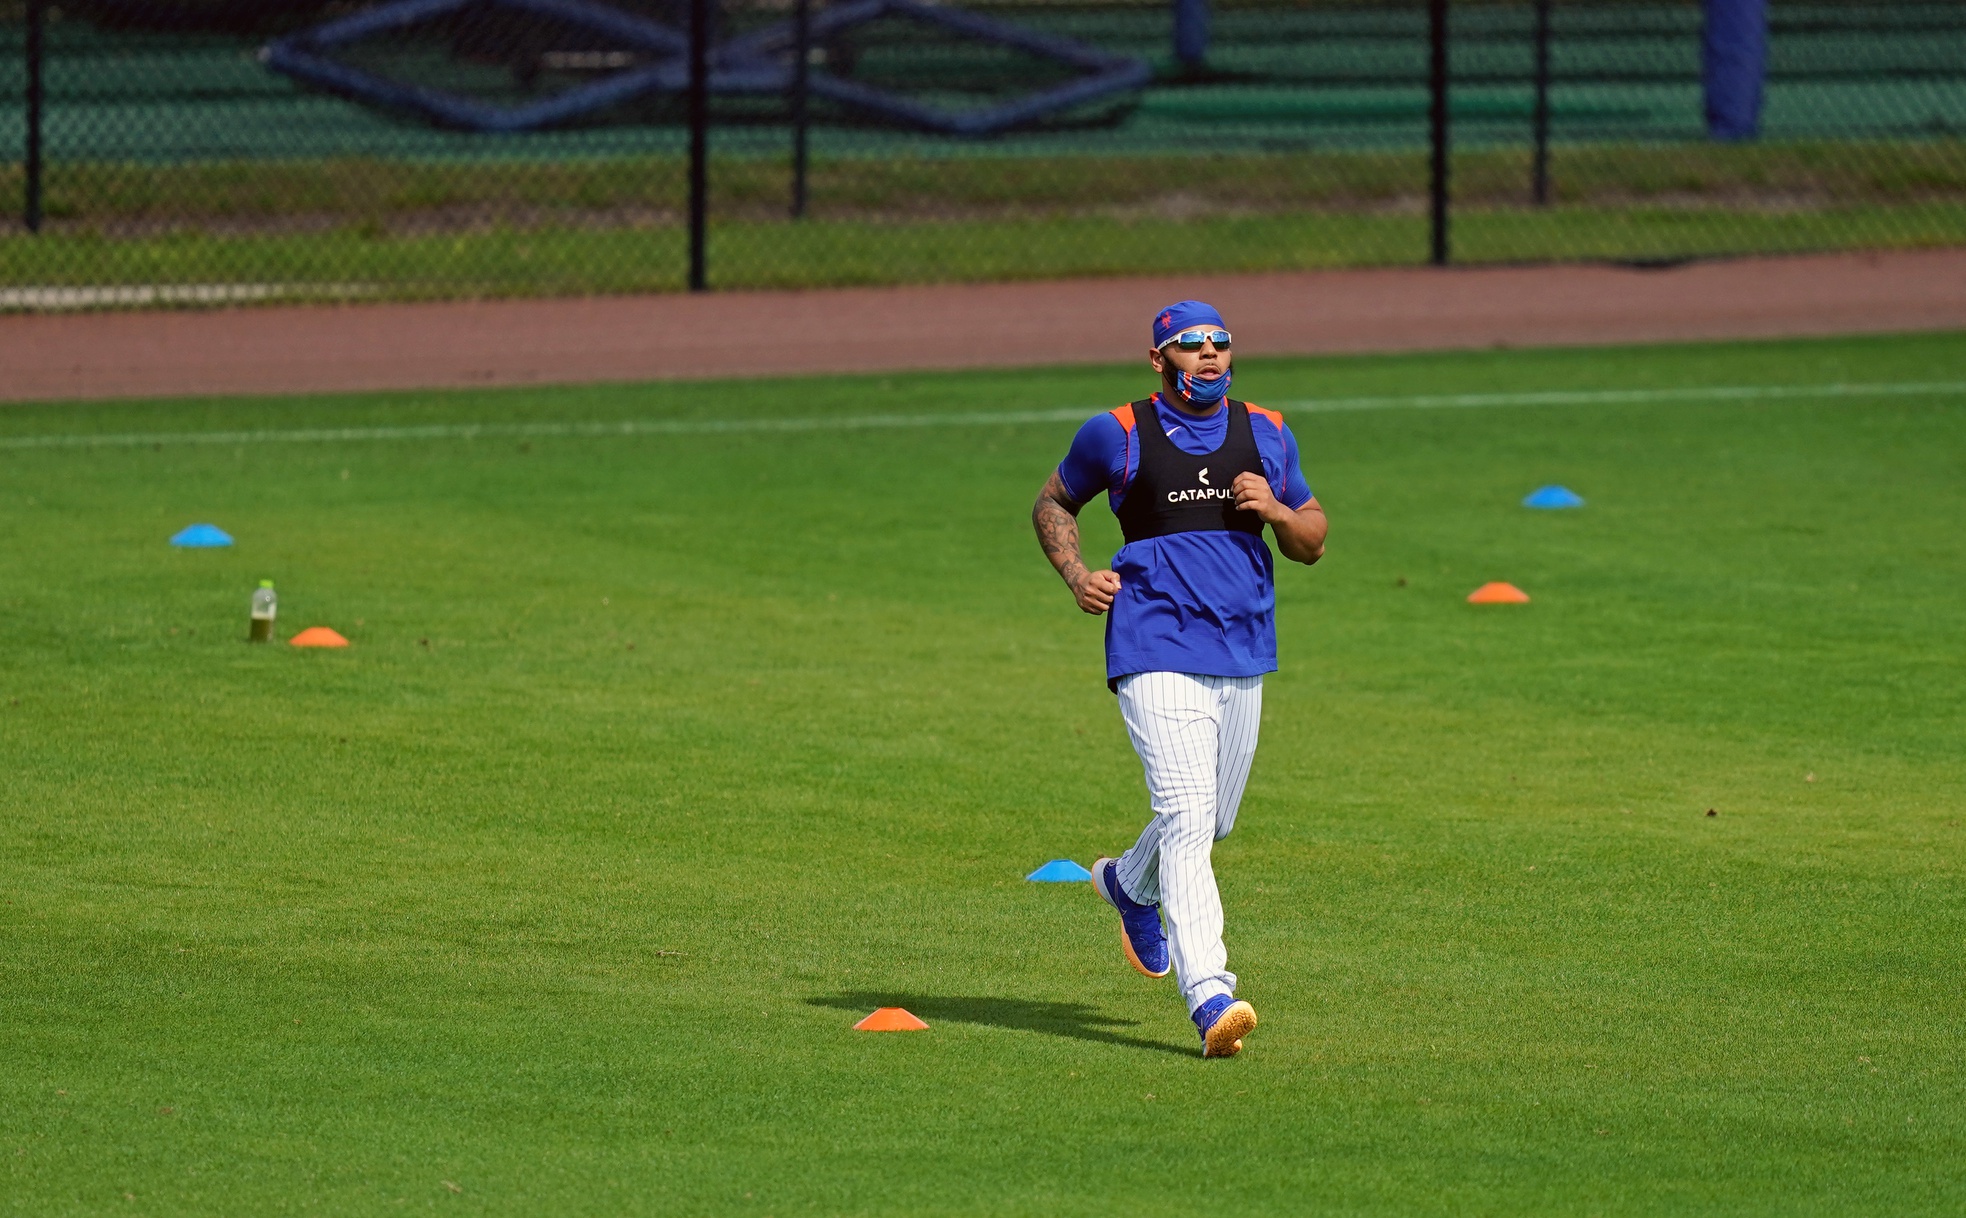 Dominic Smith Focused on Becoming More Athletic and Improving Swing